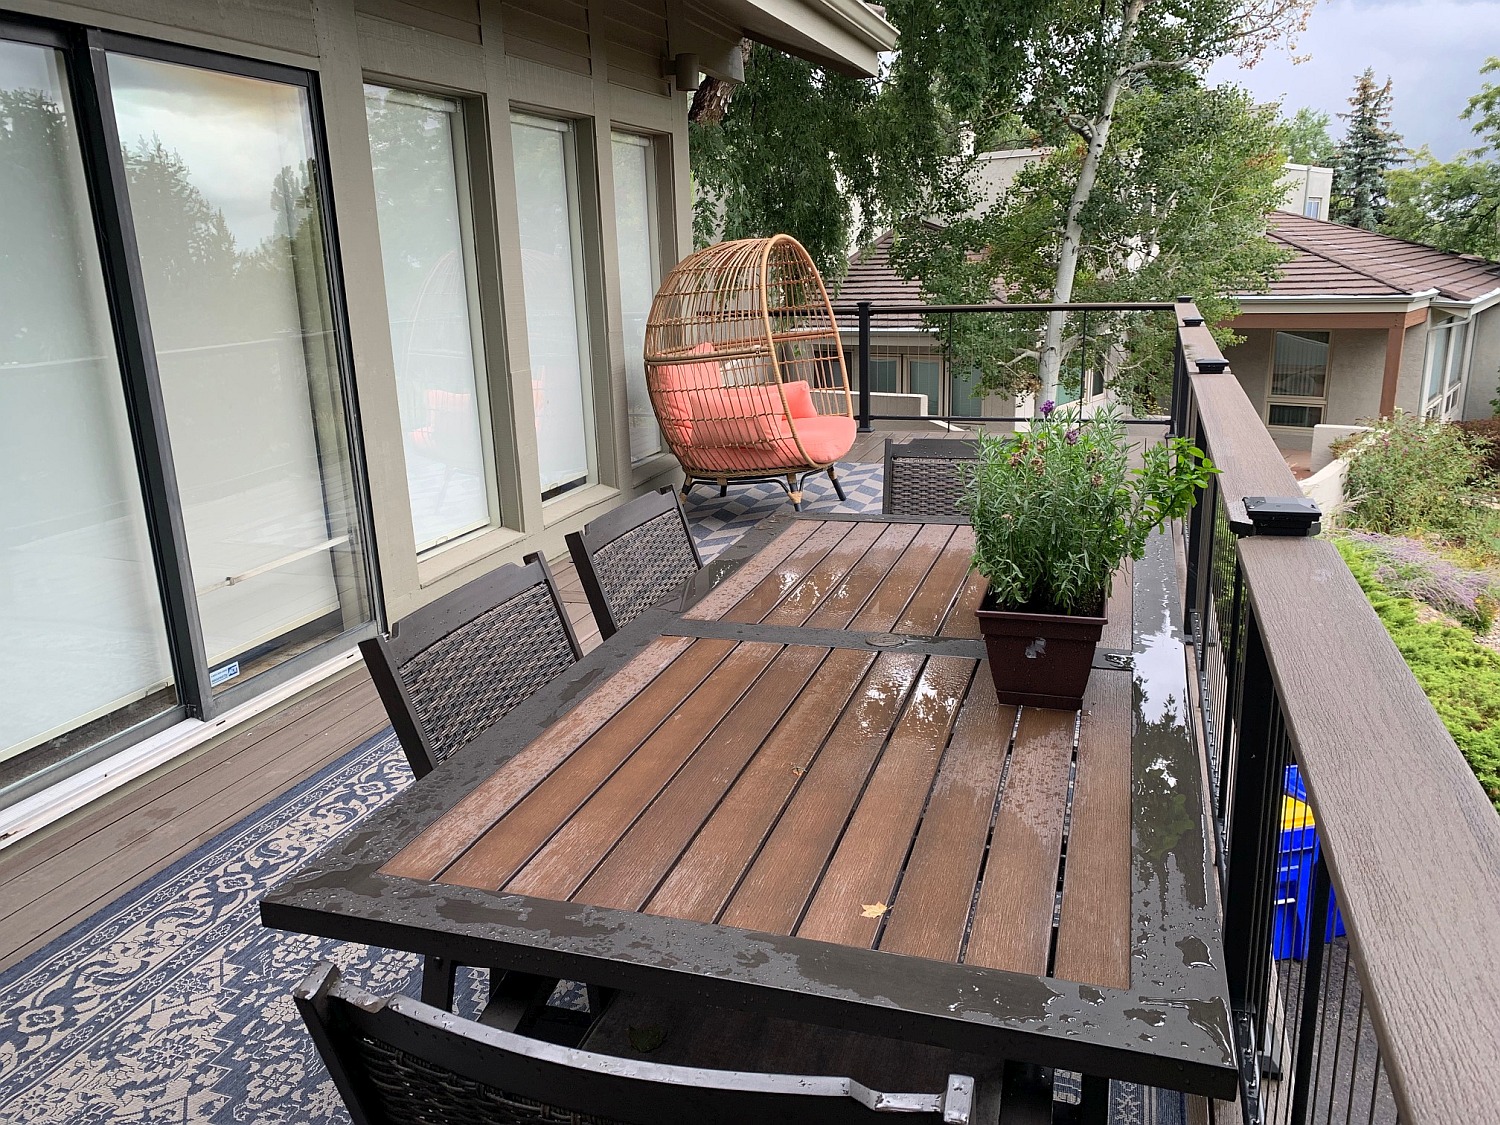 Homeowners have created a beautiful, outdoor living space on their new composite deck with a dining table, chairs, and outdoor rug.